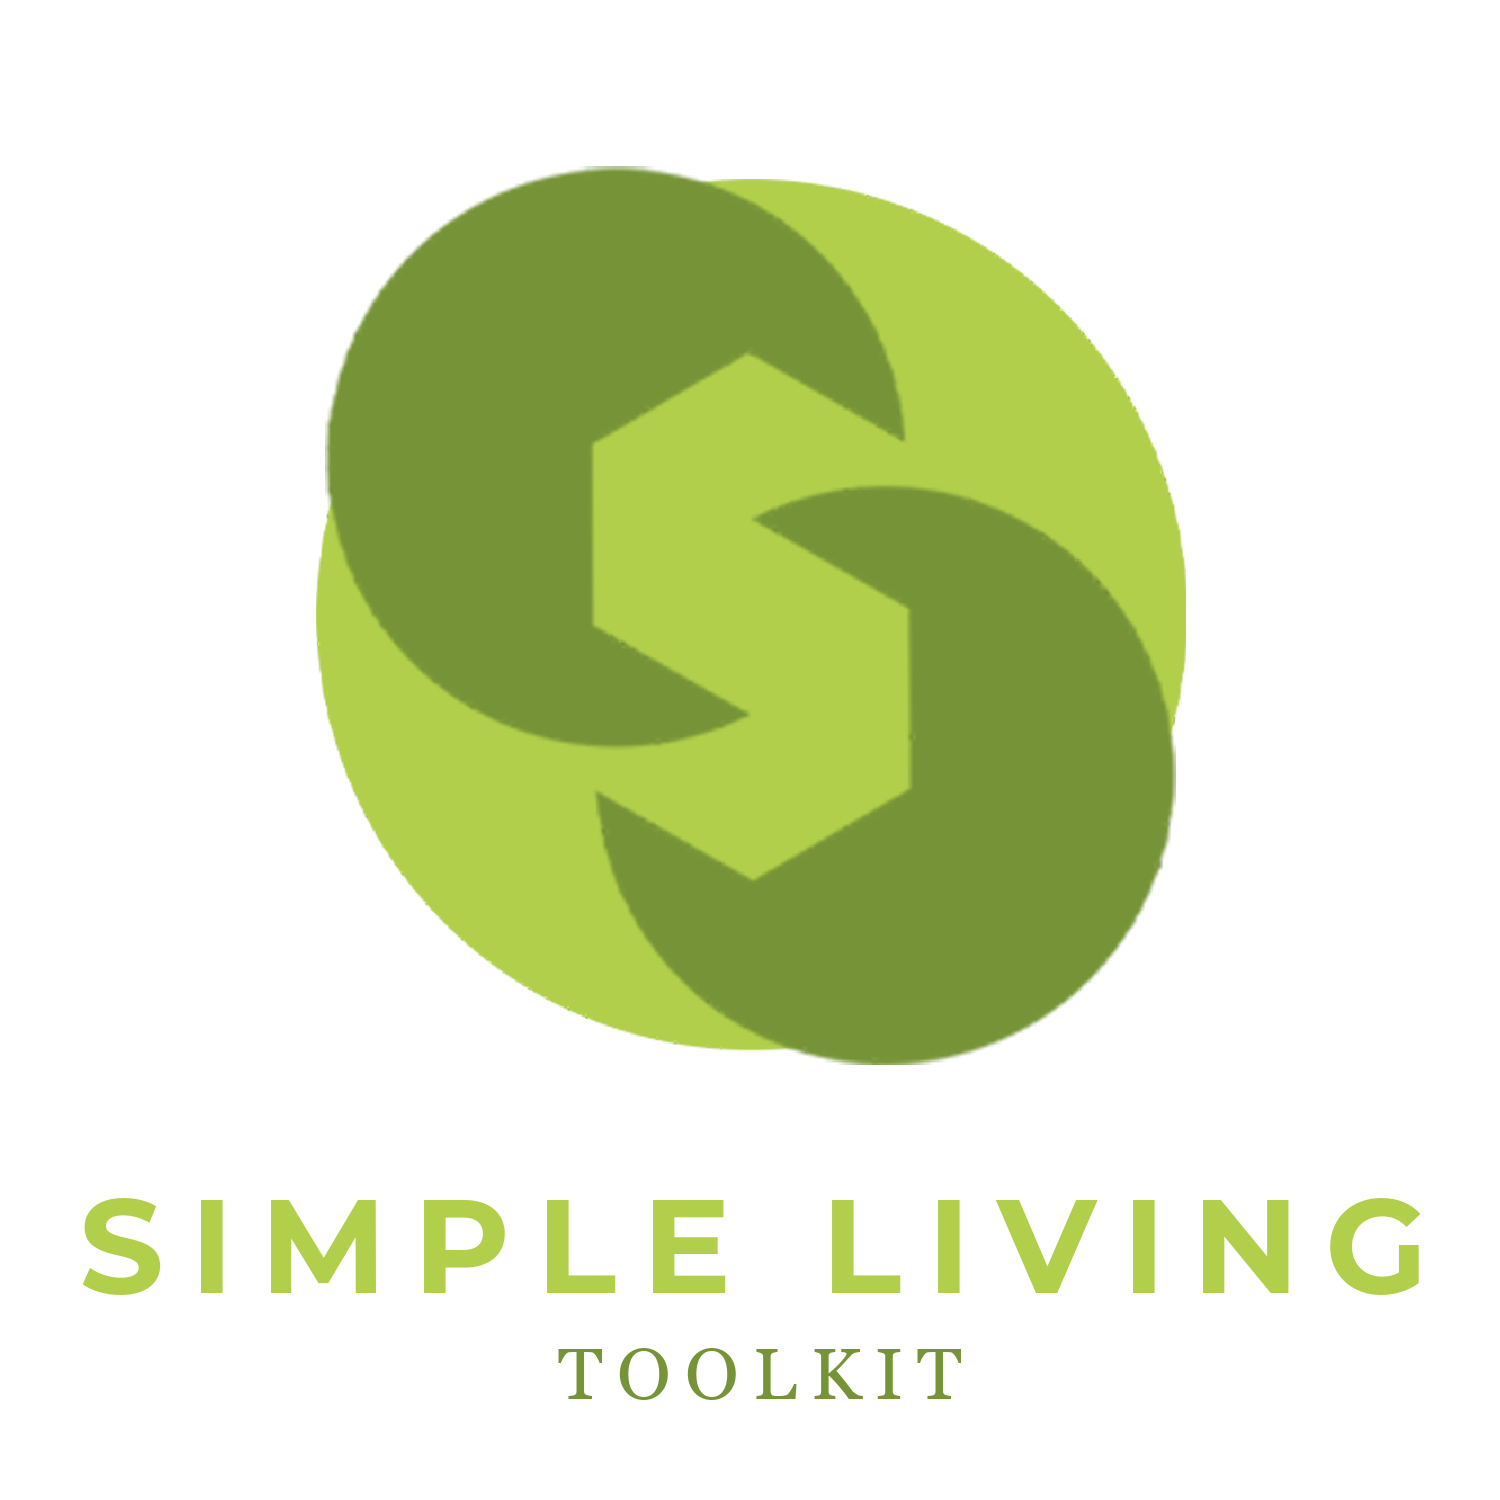 Simple Living Toolkit